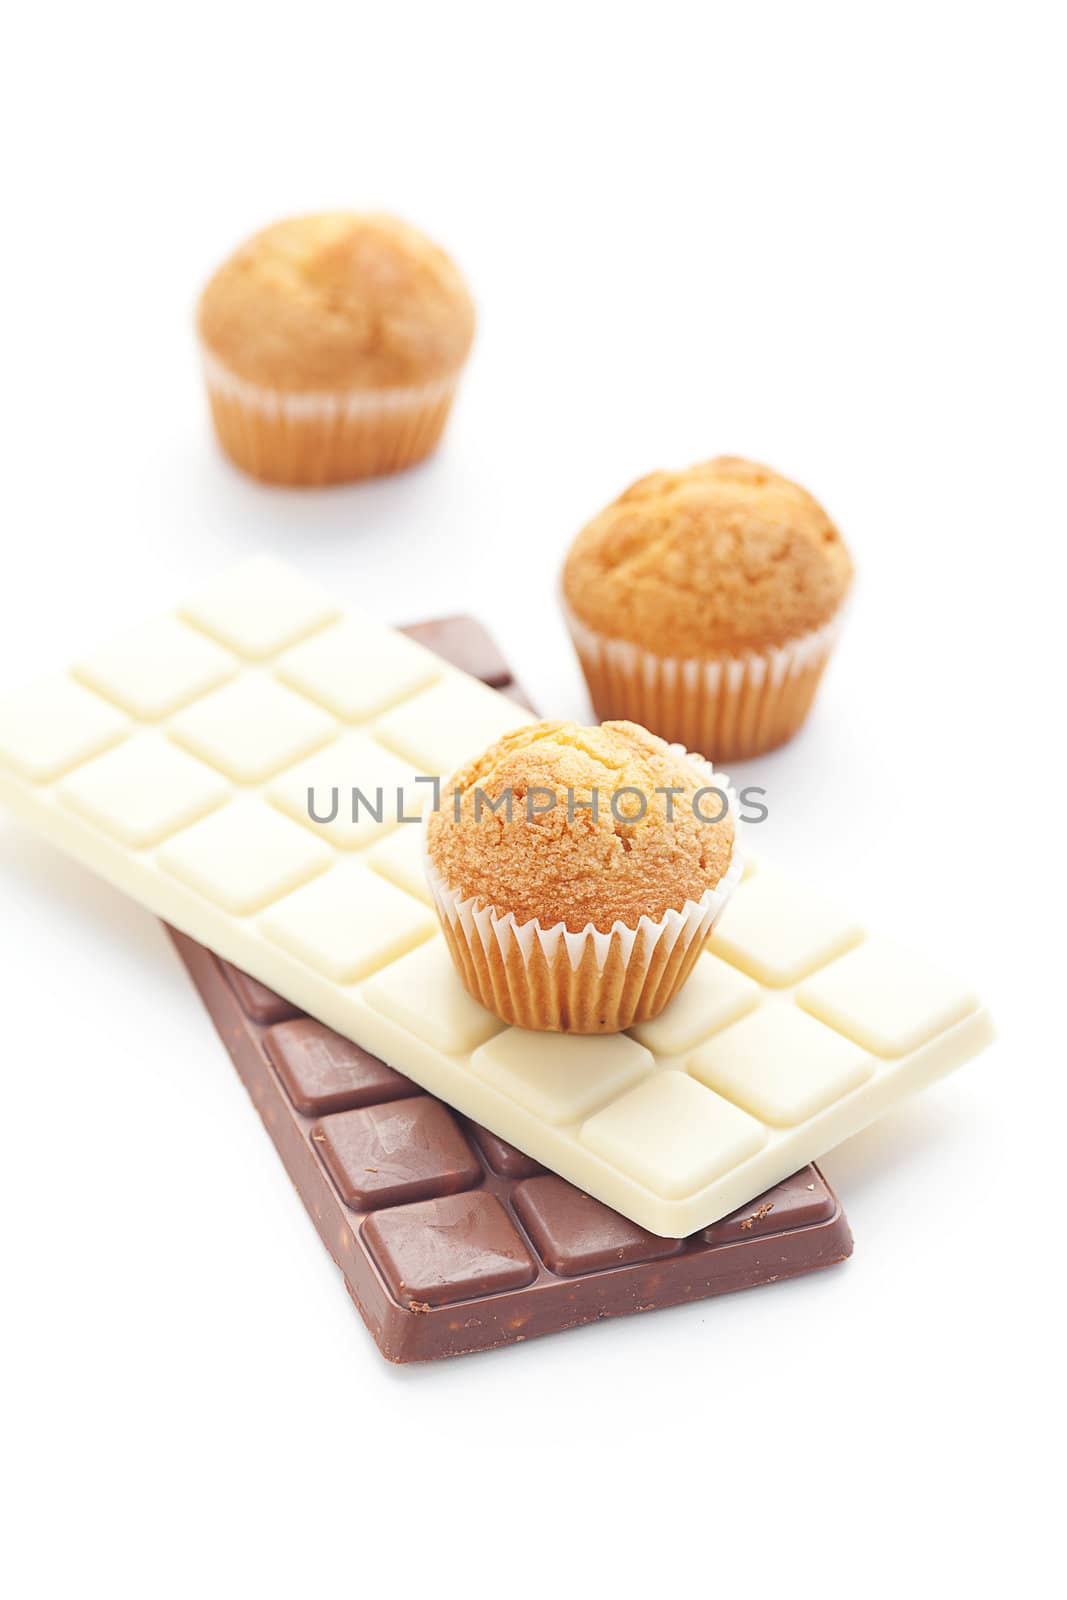 bar of chocolate and muffin isolated on white by jannyjus